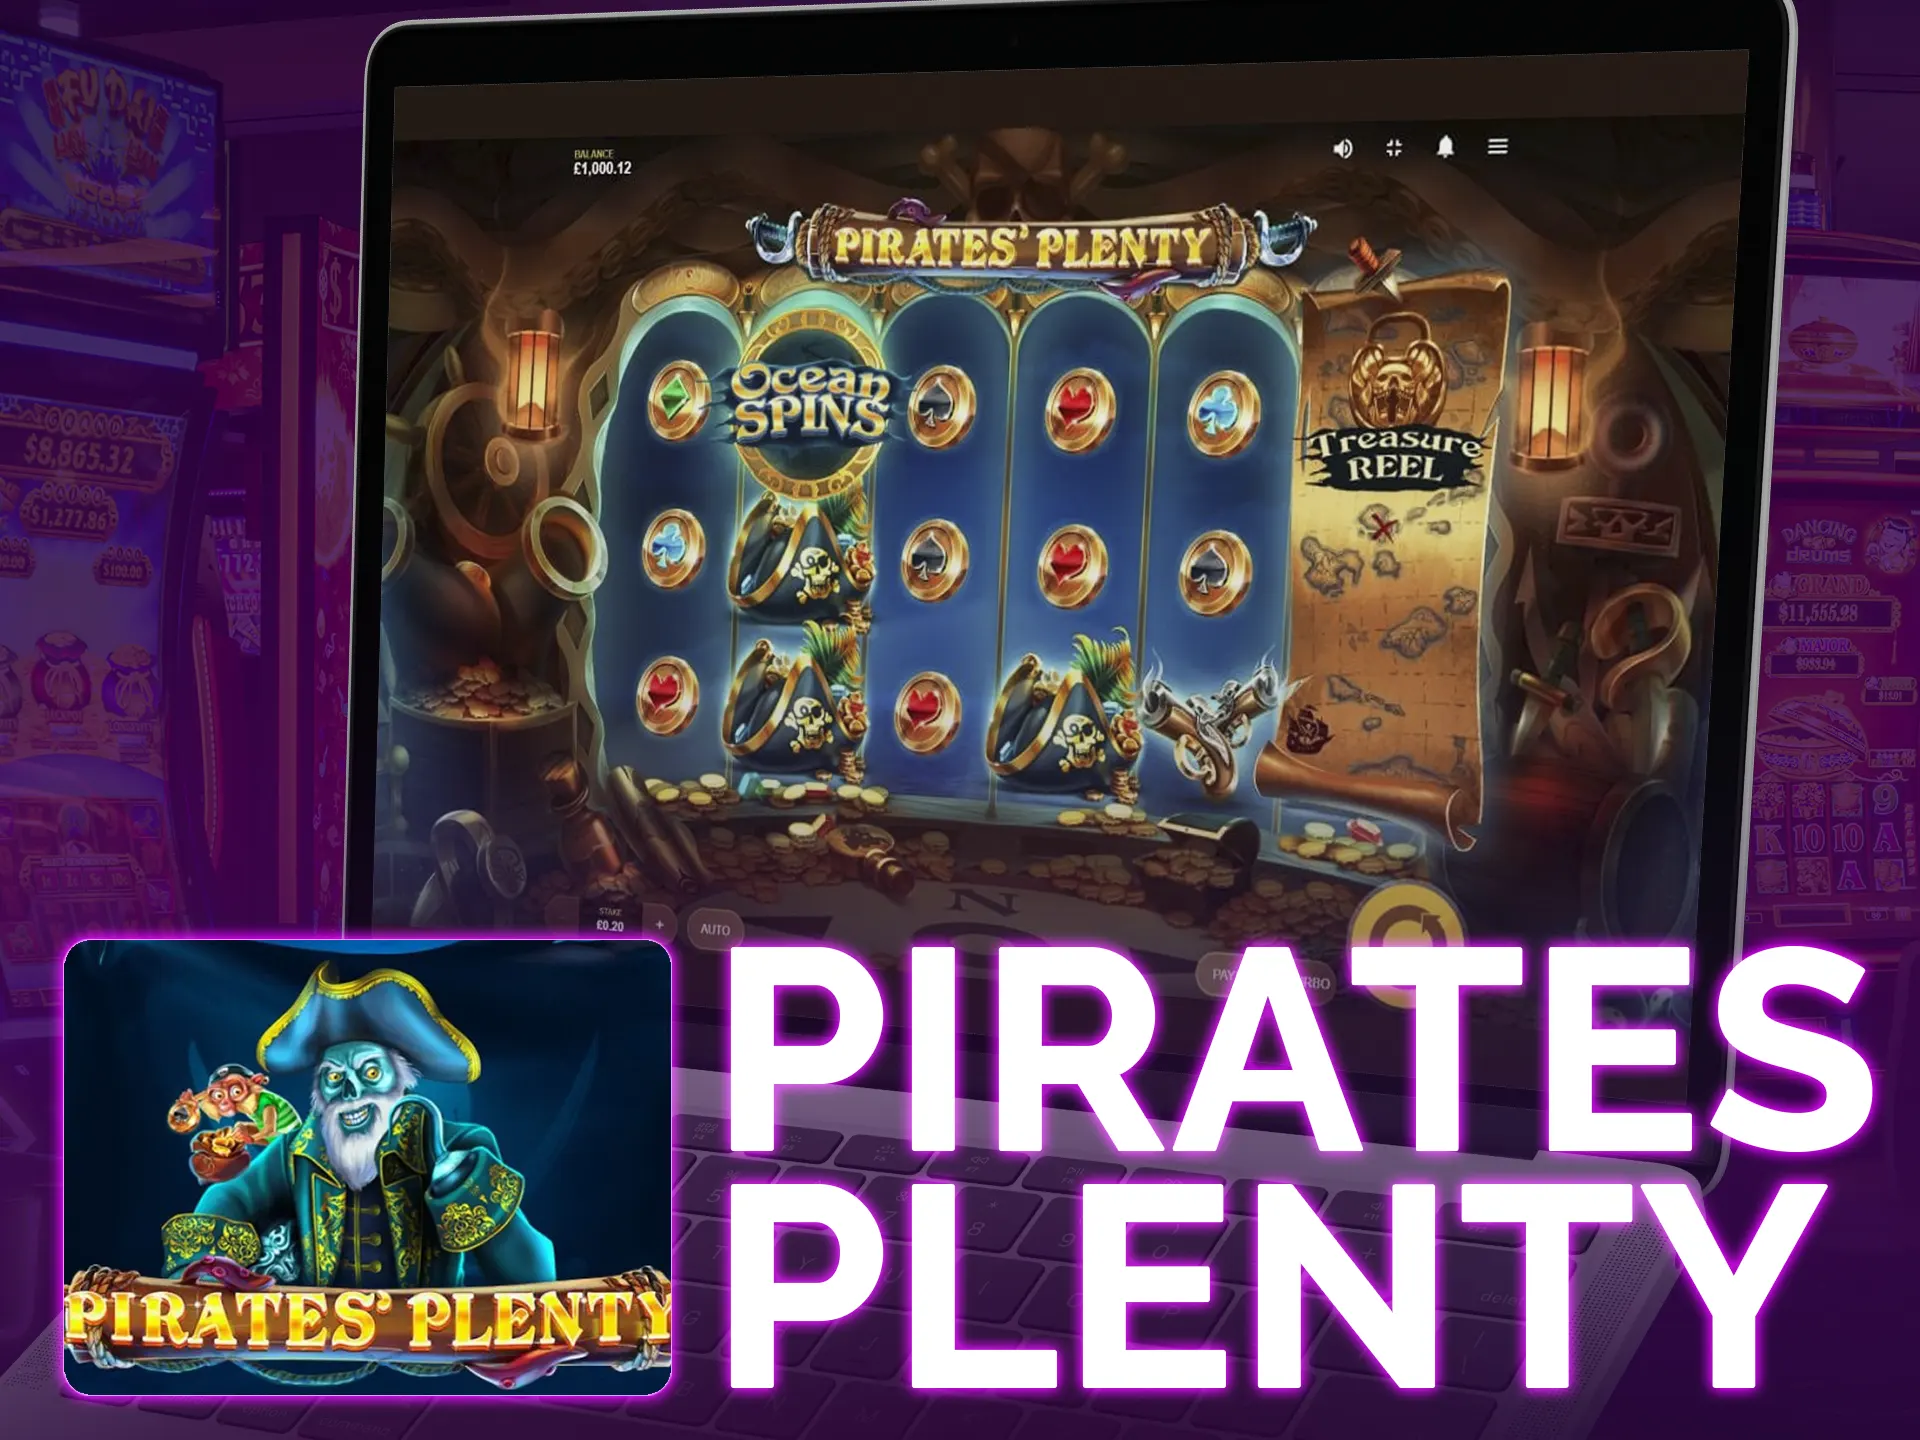 Pirates Plenty slot with high-quality graphics, soundtrack, and free spins feature.